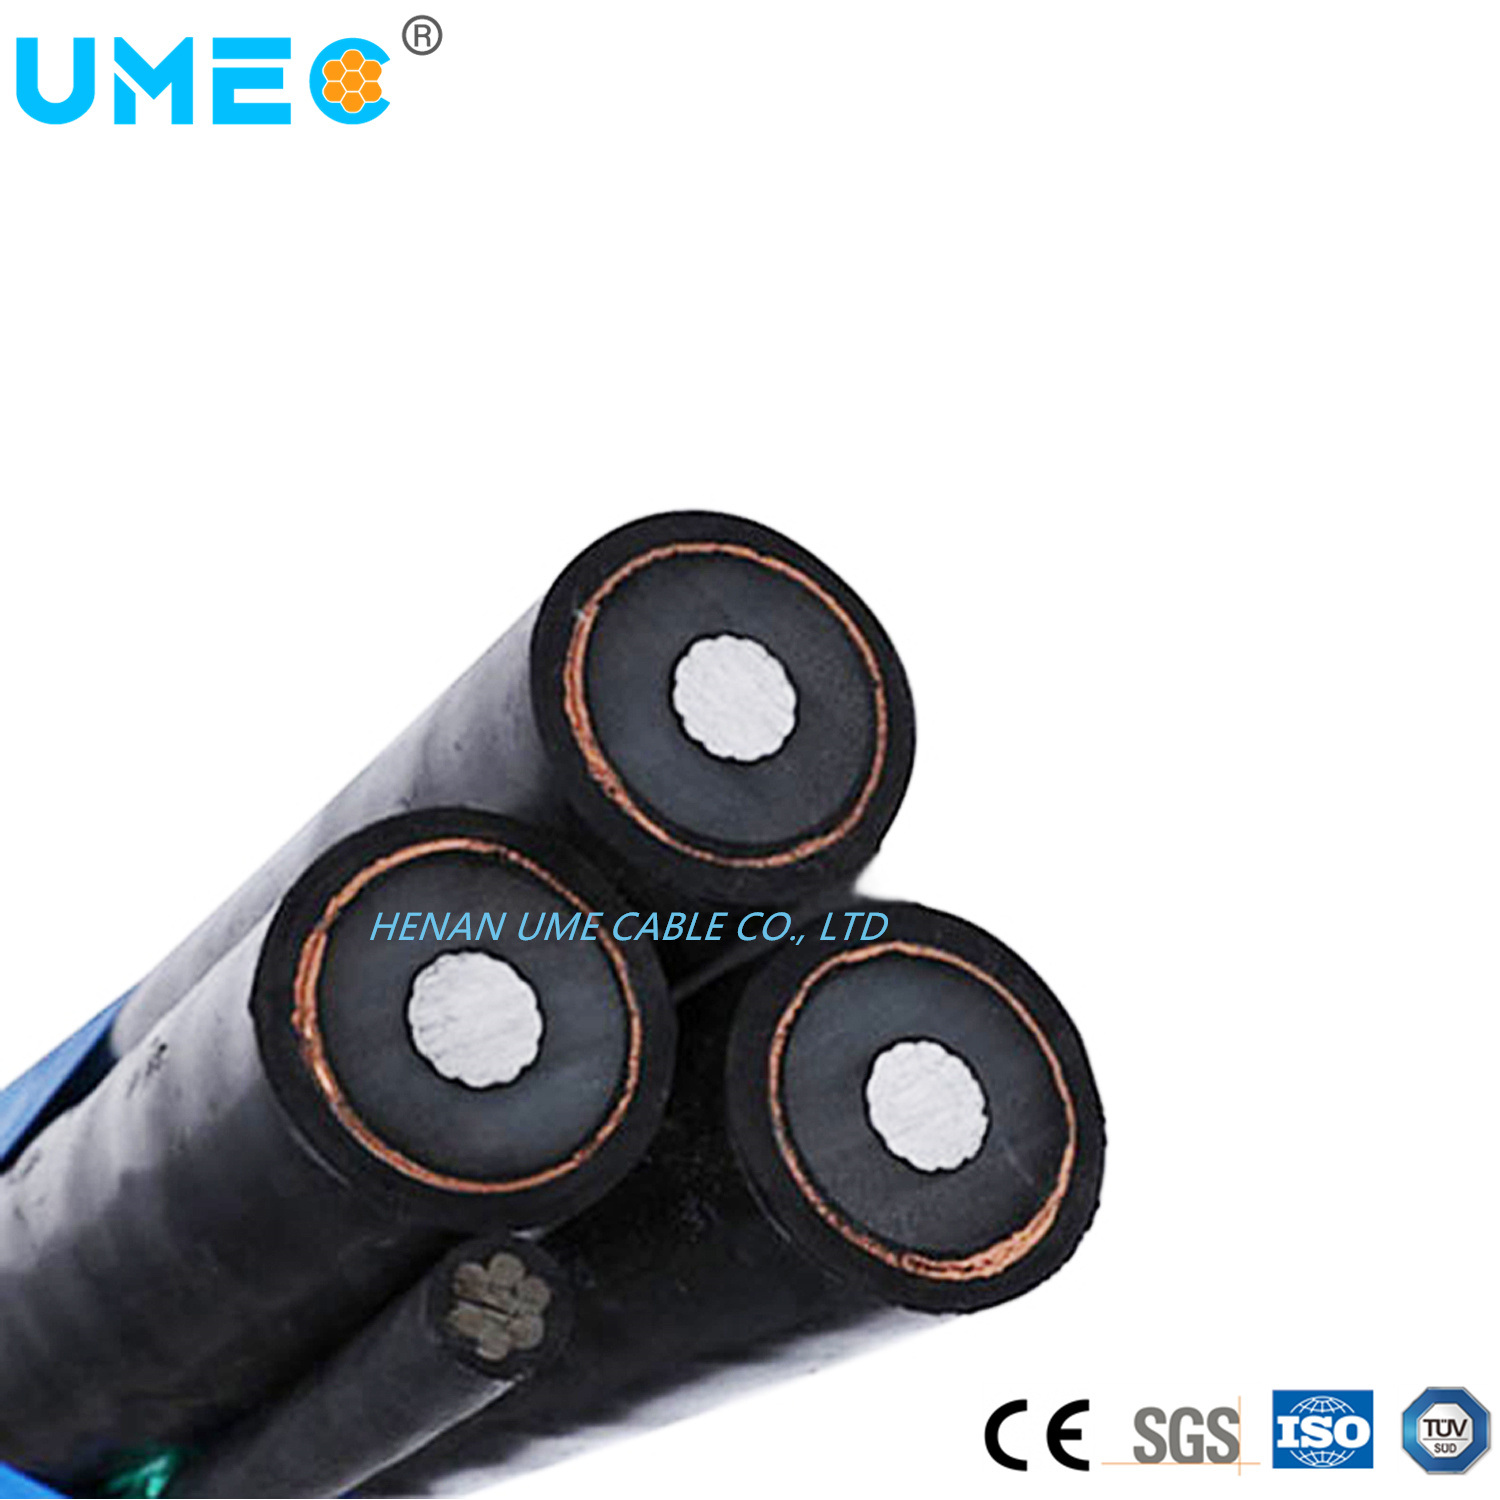 Medium Voltage Overhead ABC Power Cable/ABC Electrical Cable/XLPE Twisted Cable ABC Cable